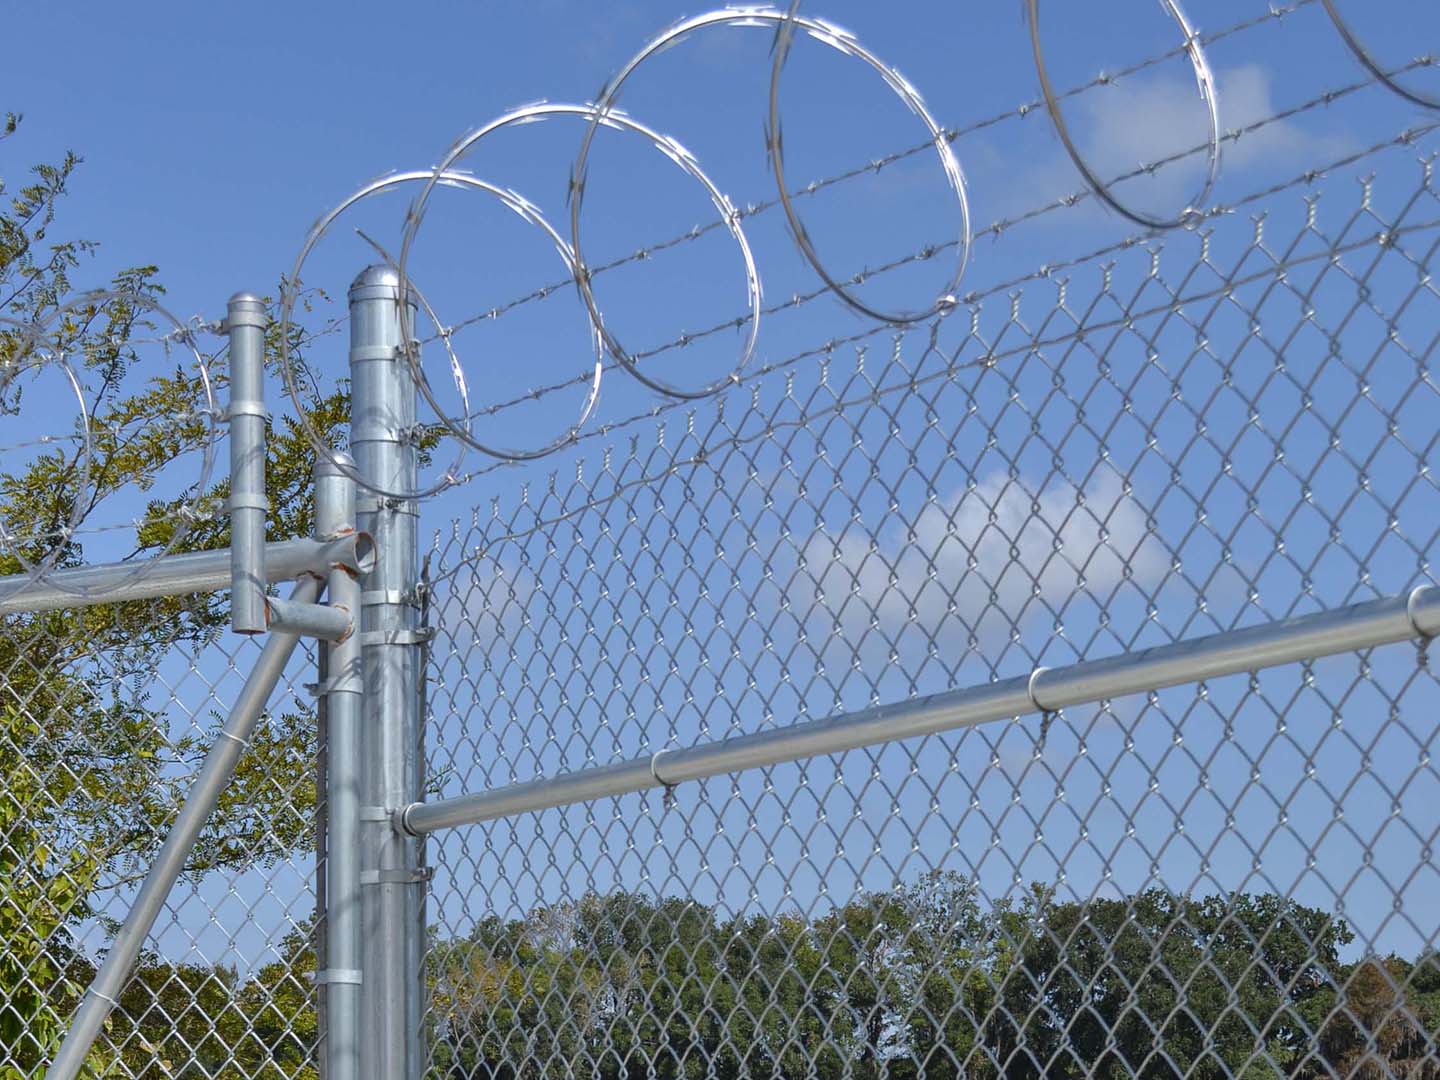 Chatham County Georgia commercial chain link fence installation contractor